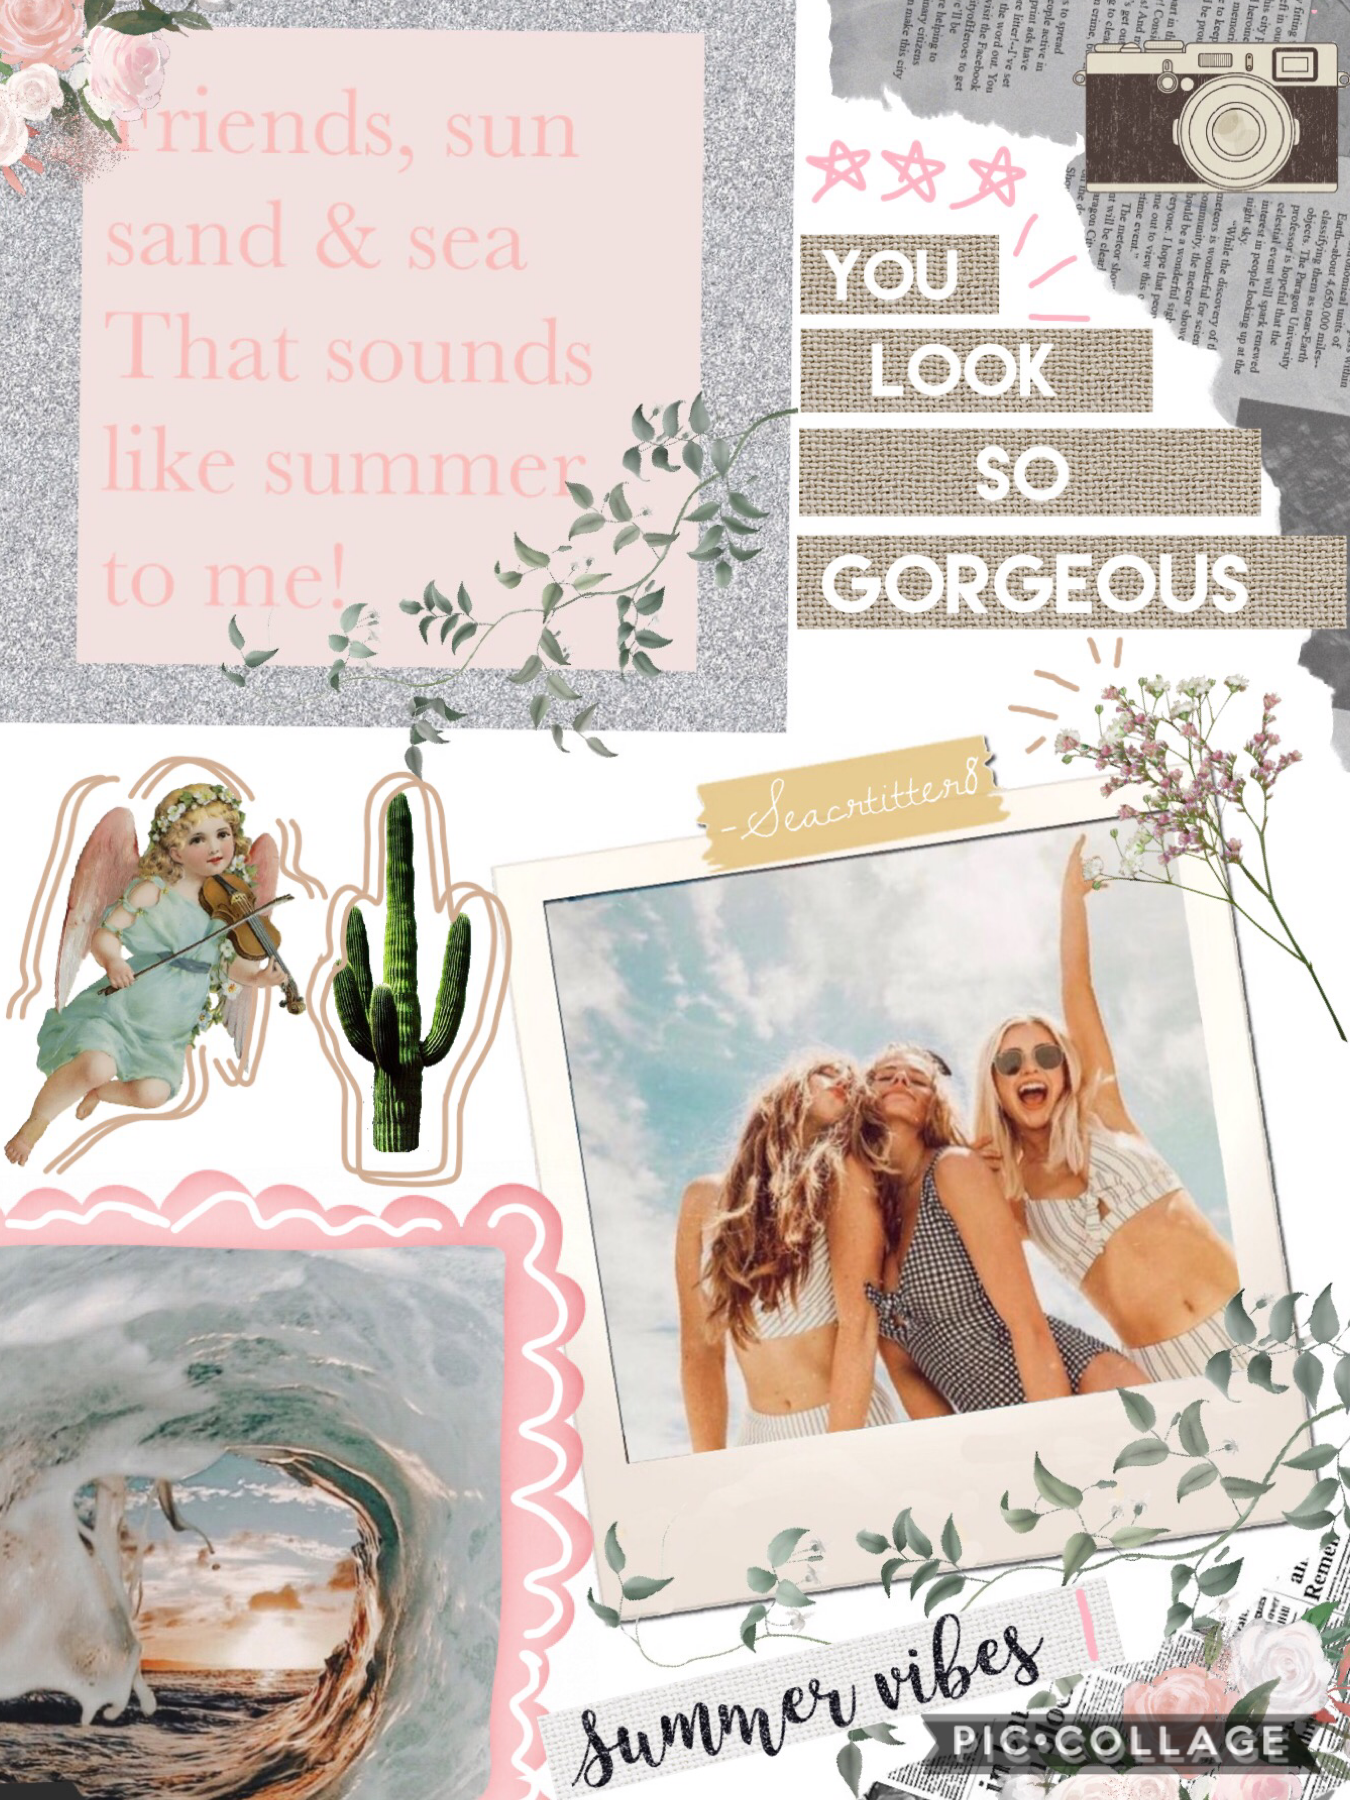 🥥Tap me🥥
This is so rushed, but I had to post something! Right now my account is a mess of collages from all different styles, some are bright and others are dark. So sorry I don’t really have a main theme to follow right, now I am all over the place!😊💕